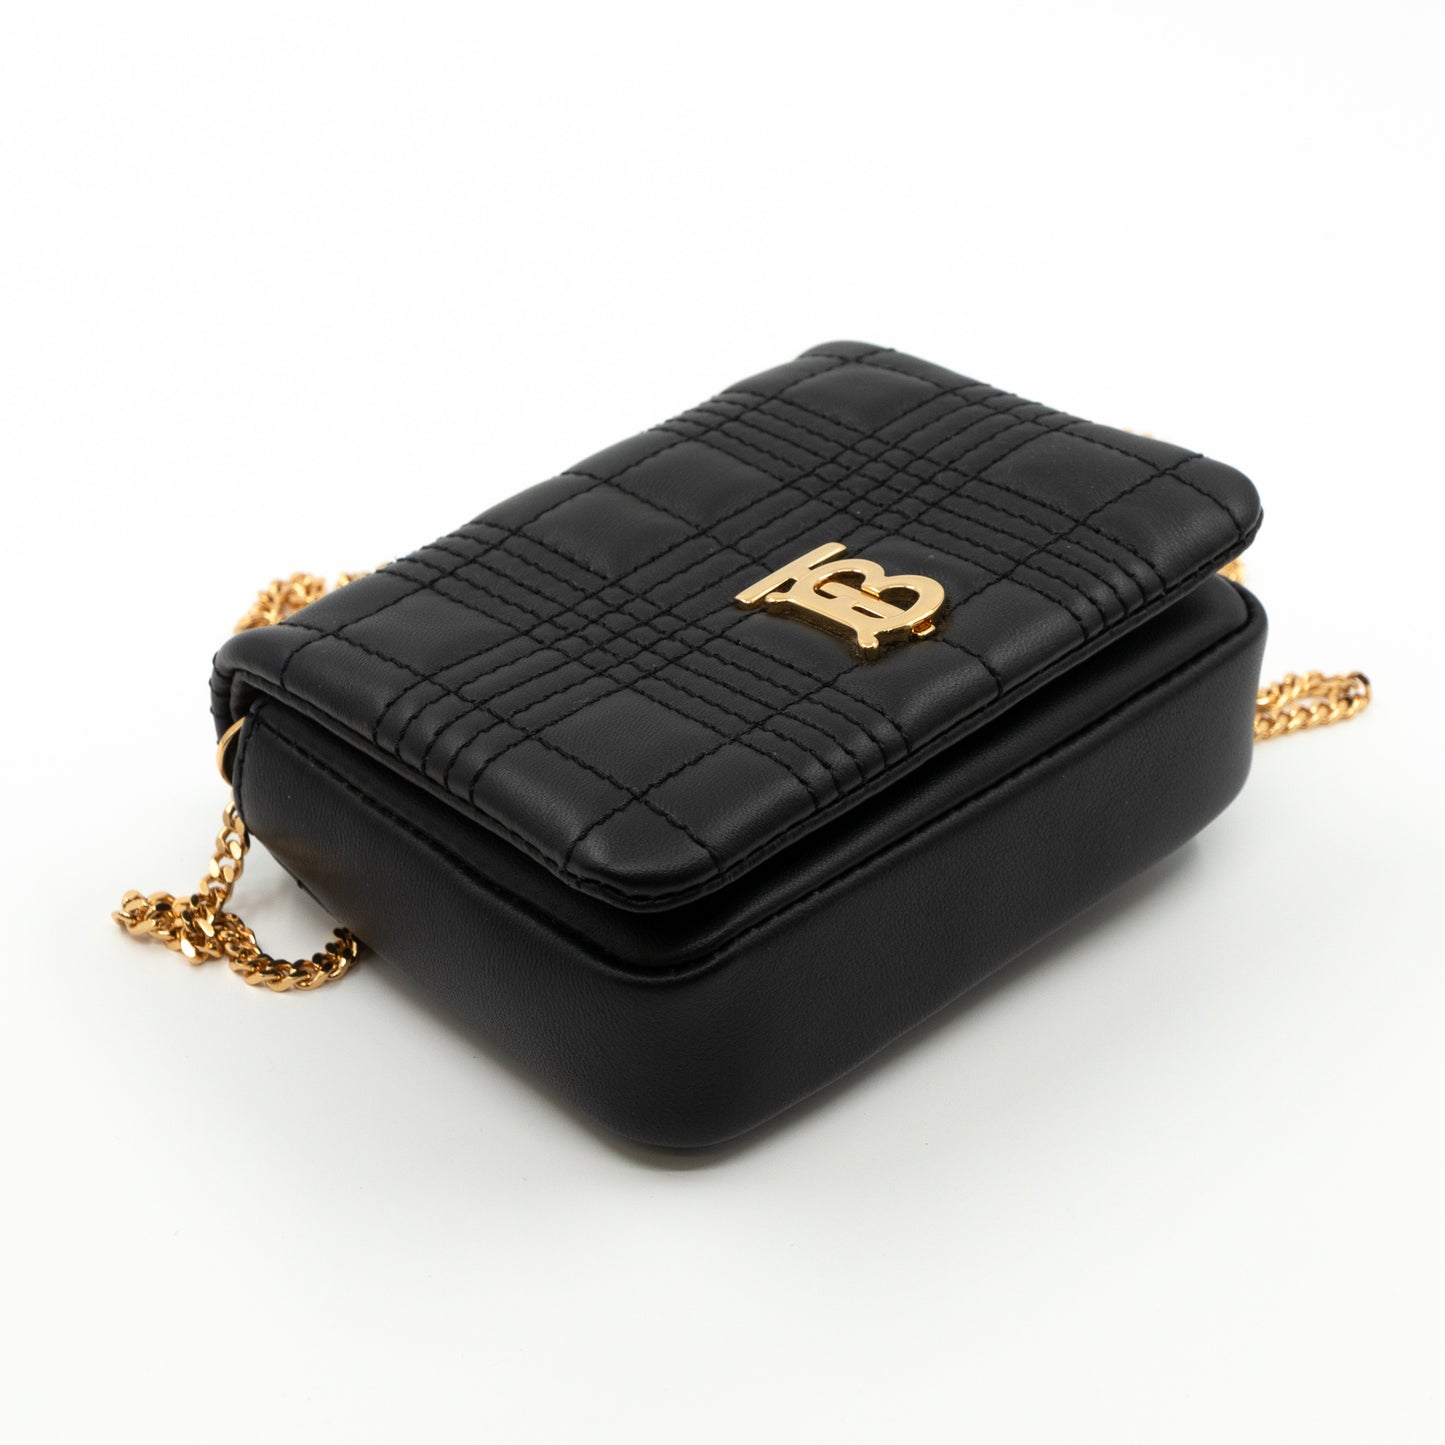 Micro Quilted Lola Shoulder Bag Black Leather